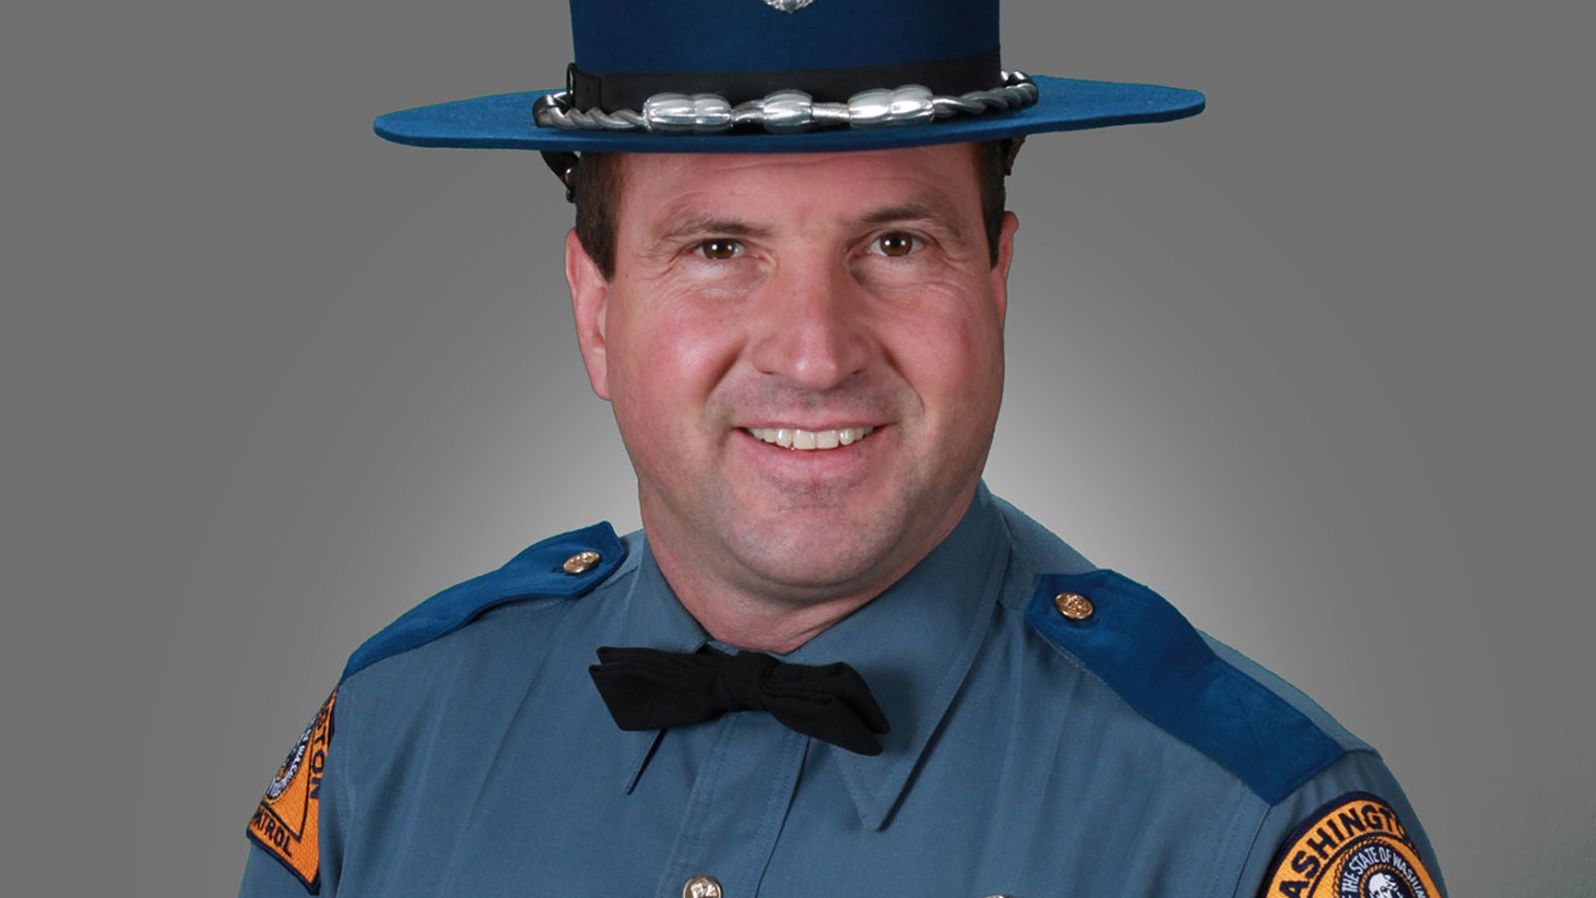 Steve Houle, 51, of Cle Elum died in an avalanche Monday. He was a 28-year veteran of the Washington State Patrol.